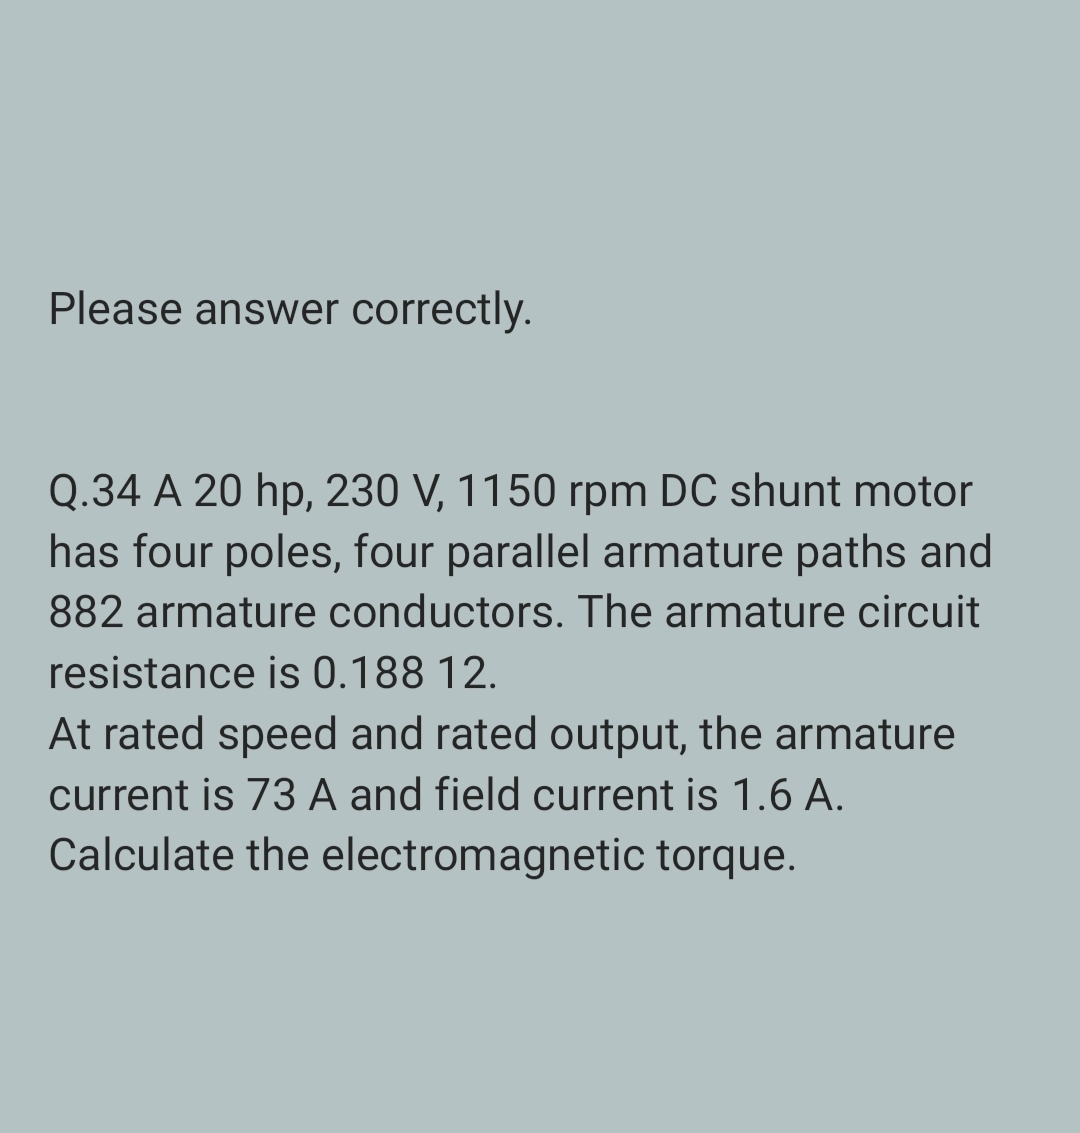 Please answer correctly.
Q.34 A 20 hp, 230 V, 1150 rpm DC shunt motor
has four poles, four parallel armature paths and
882 armature conductors. The armature circuit
resistance is 0.188 12.
At rated speed and rated output, the armature
current is 73 A and field current is 1.6 A.
Calculate the electromagnetic torque.
